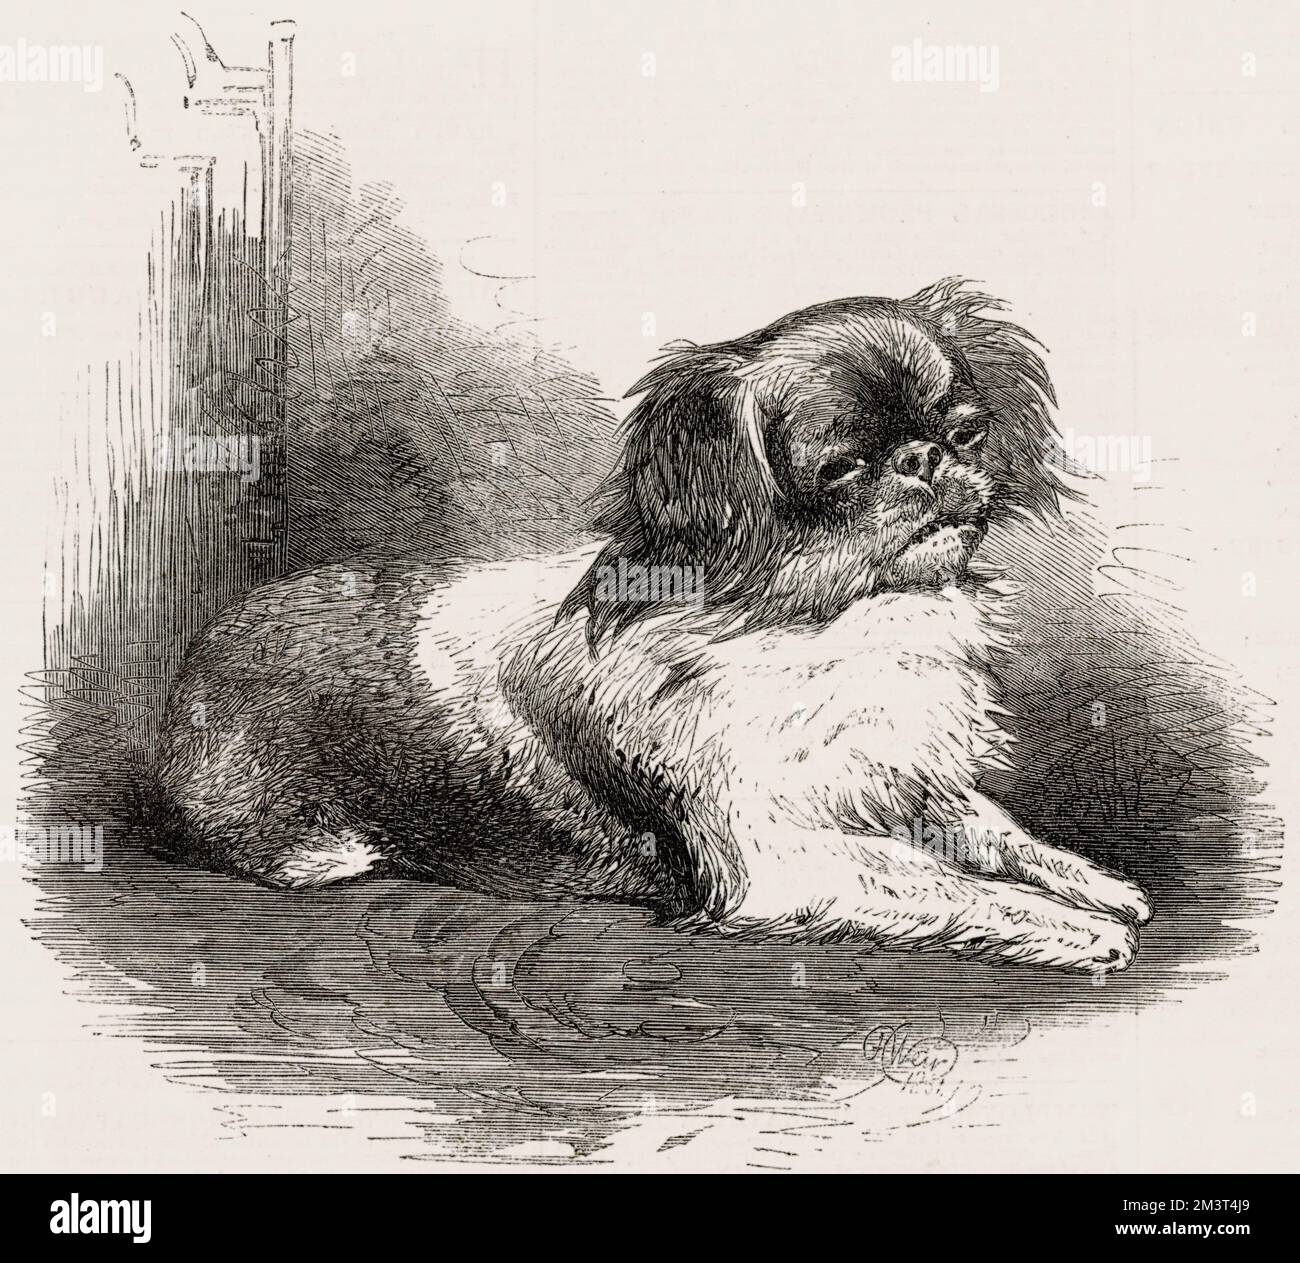 Looty, a little Pekingese dog found during the looting by British and French troops of the Imperial Palace of Yuen-Ming-Yuen (the Old Summer Palace, Yuanmingyuan), near Peking (Beijing) in October 1860 by Captain Dunne of the 99th Regiment. Looty was brought to England and presented to Queen Victoria, becoming part of the Royal collection of dogs. Stock Photo